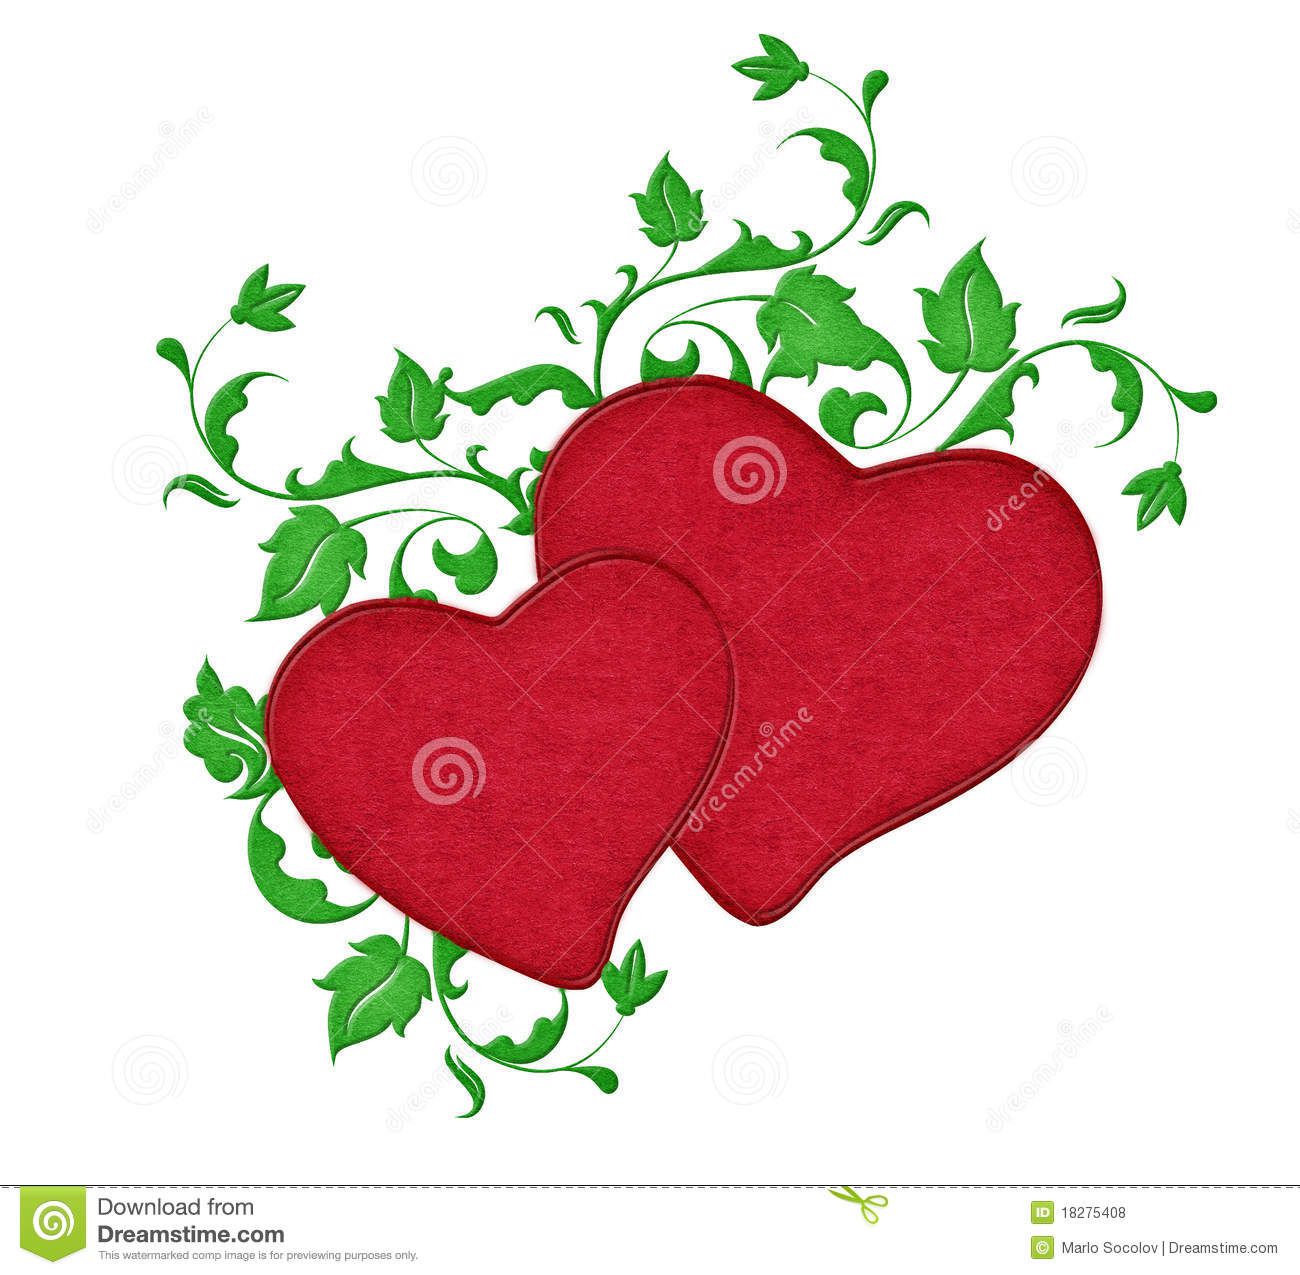 two-red-hearts-vines-18275408